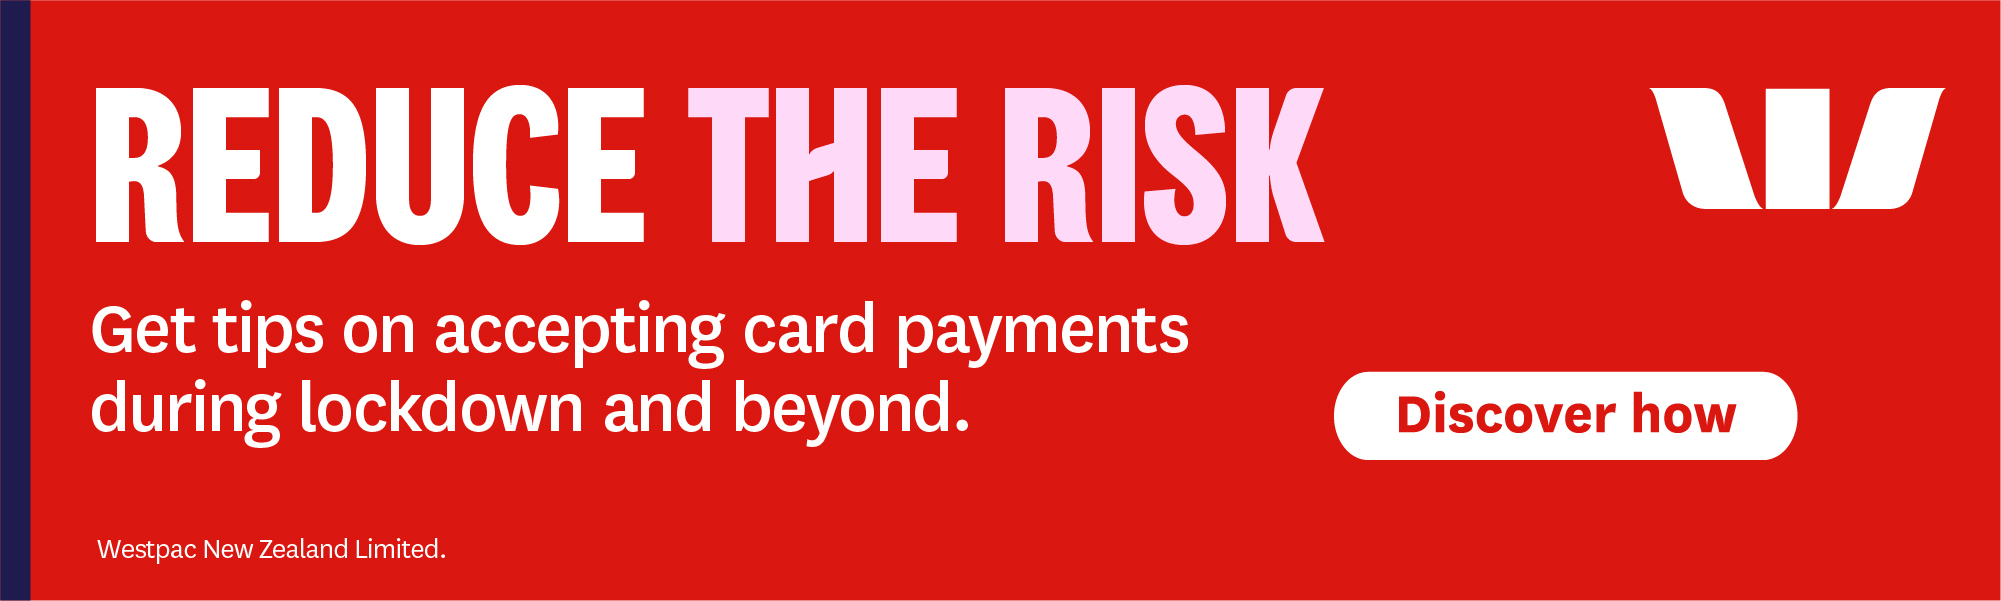 Westpac NZ ad: Tips on accepting card payments during lockdown and beyond. Read the article.